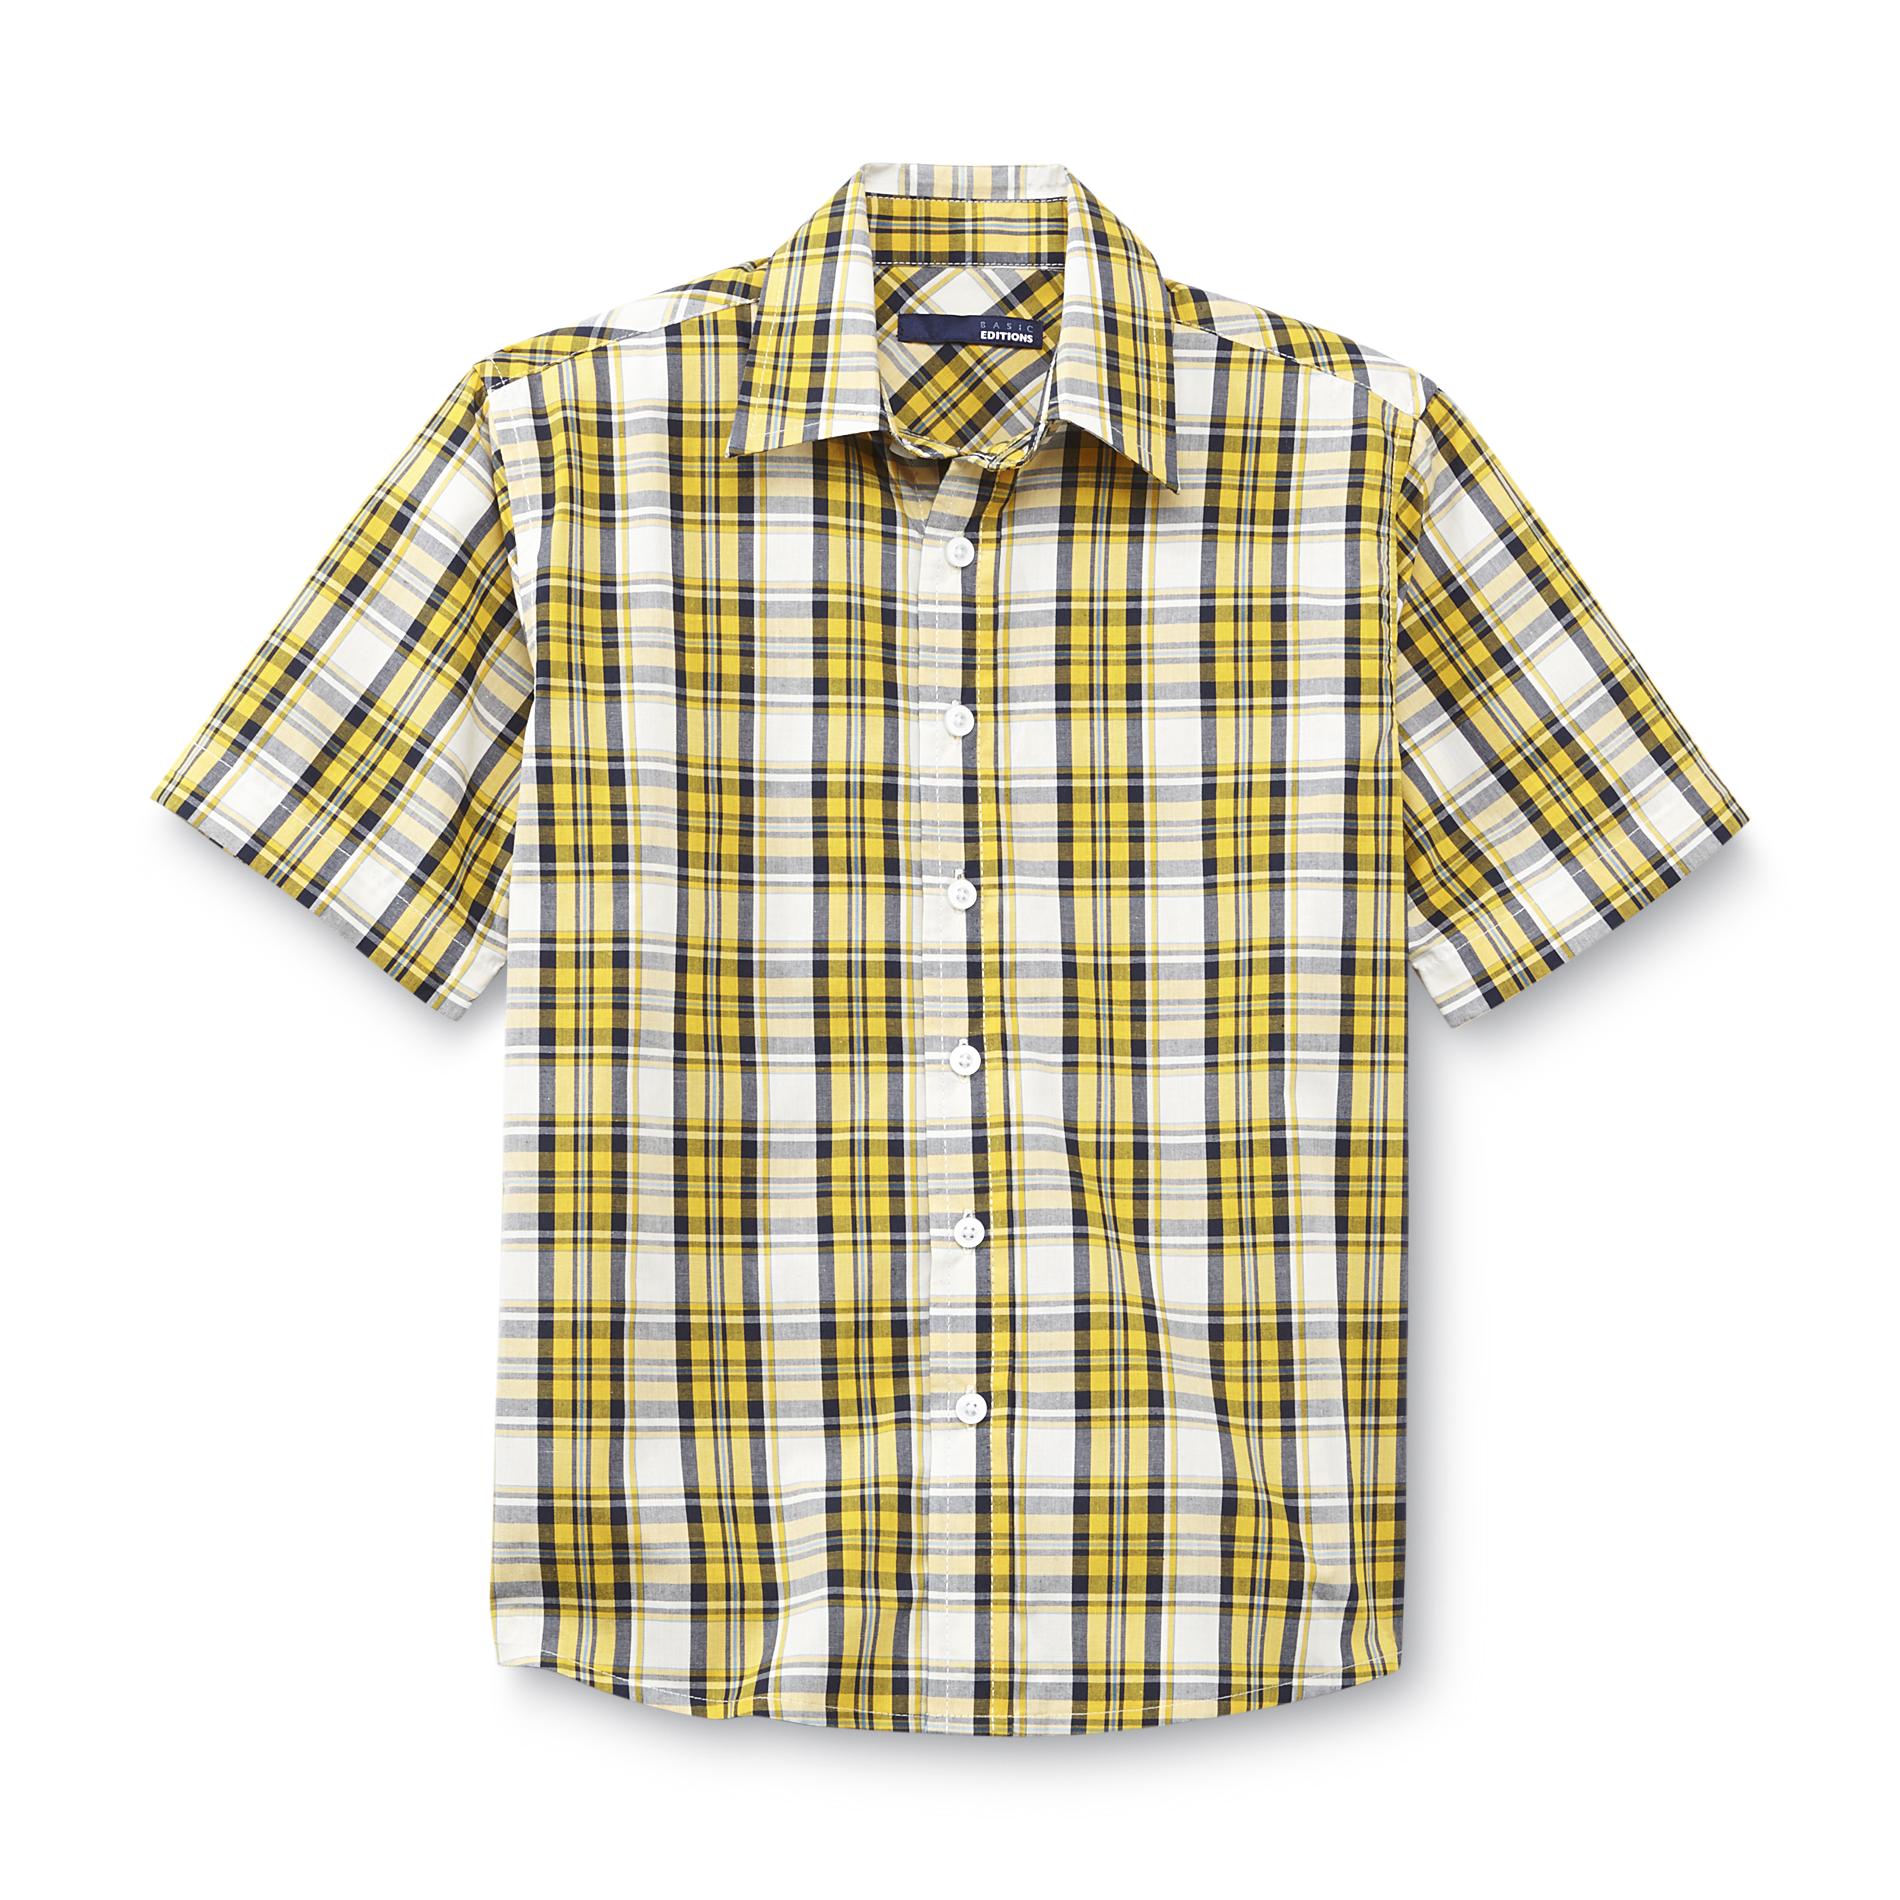 Basic Editions Boy's Short-Sleeve Button-Front Shirt - Plaid